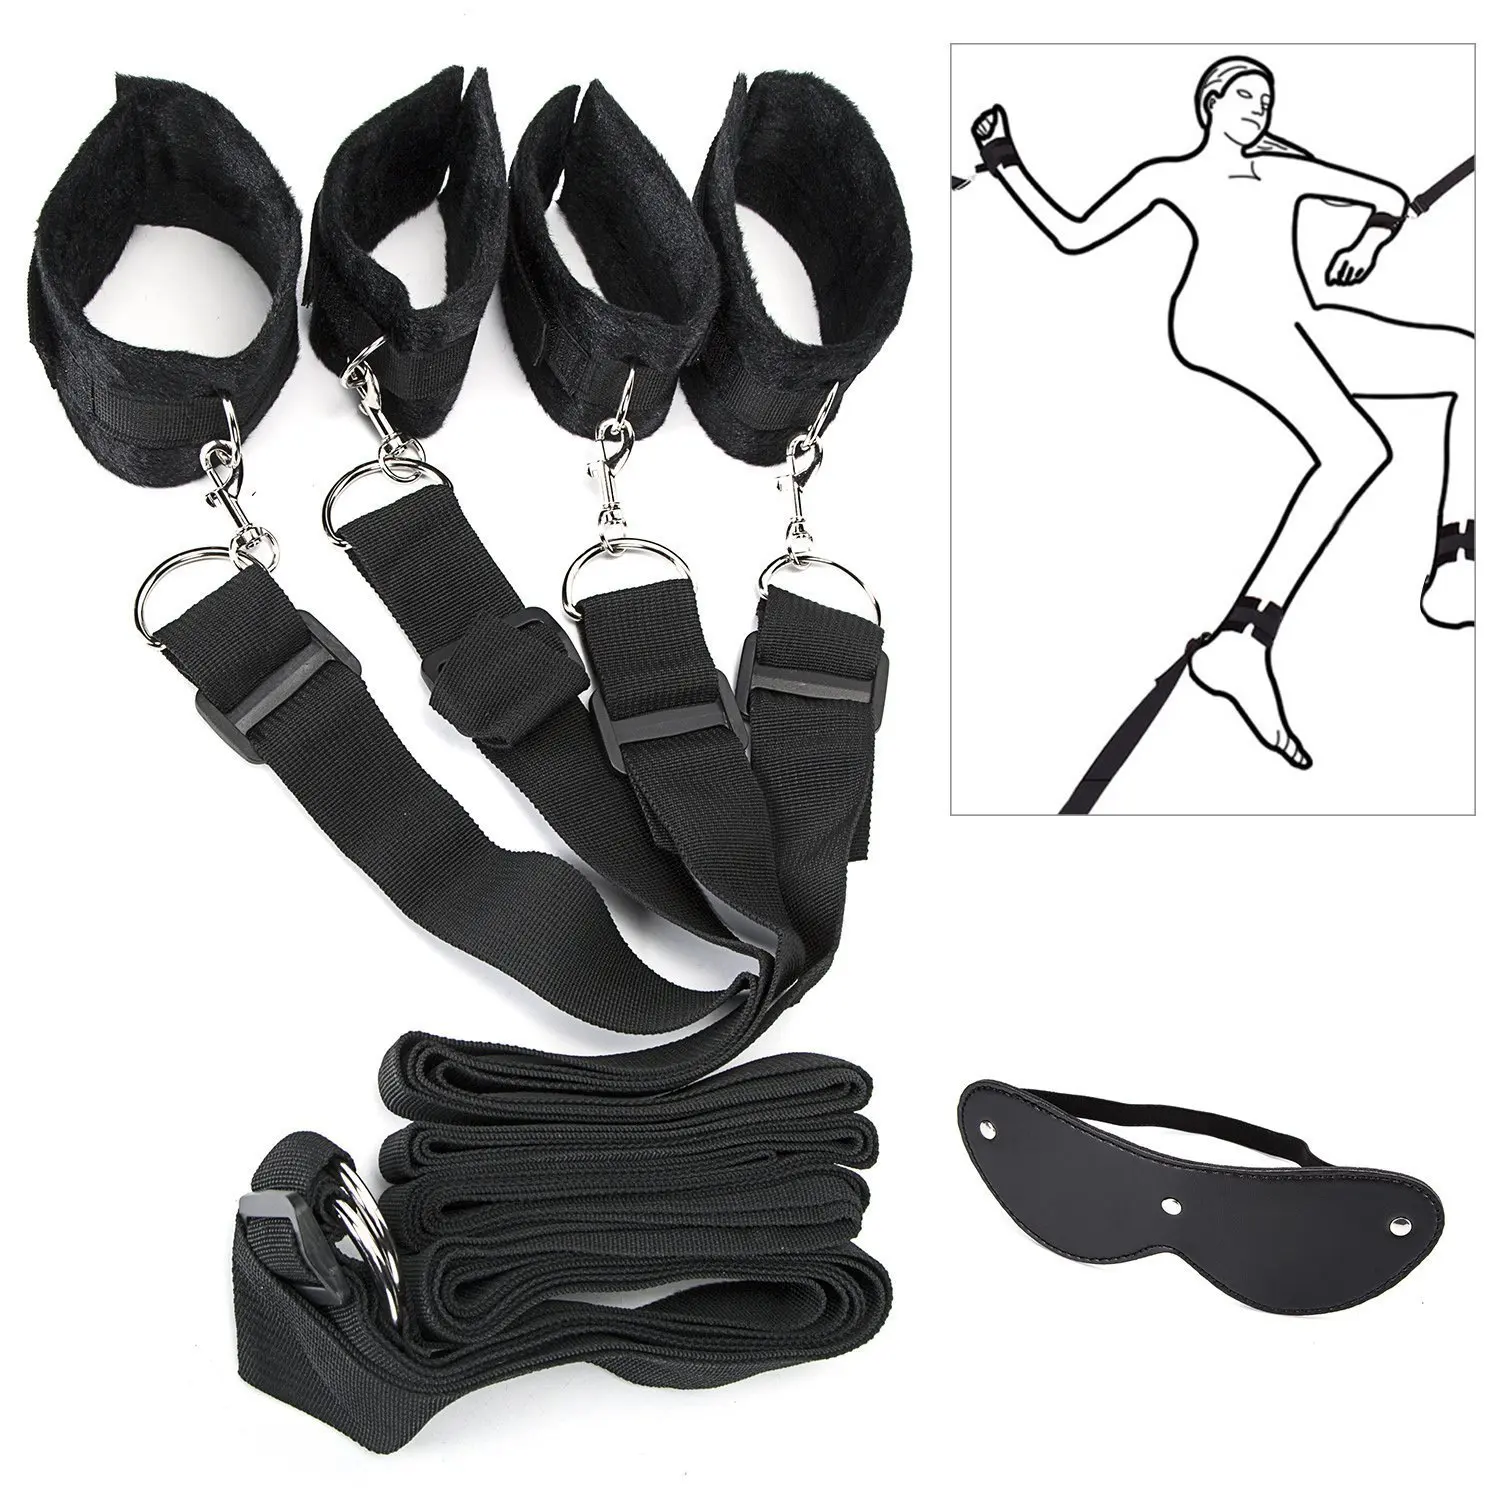 Buy Bdsms Restraints Kit Wrist Thigh Leg Retraint System Hand And Ankle